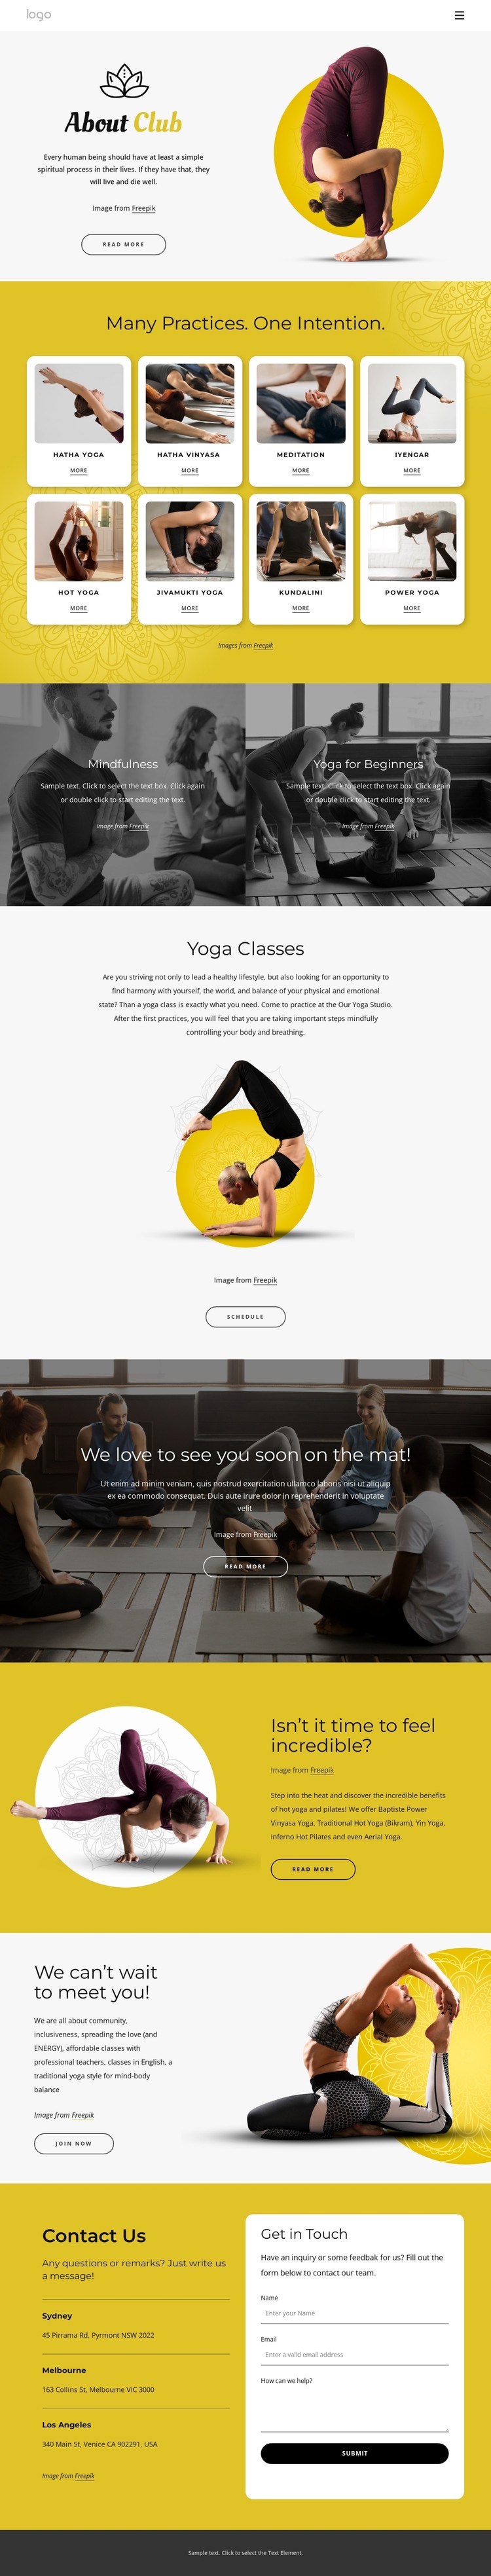 Physical, ethical and spiritual practice CSS Template